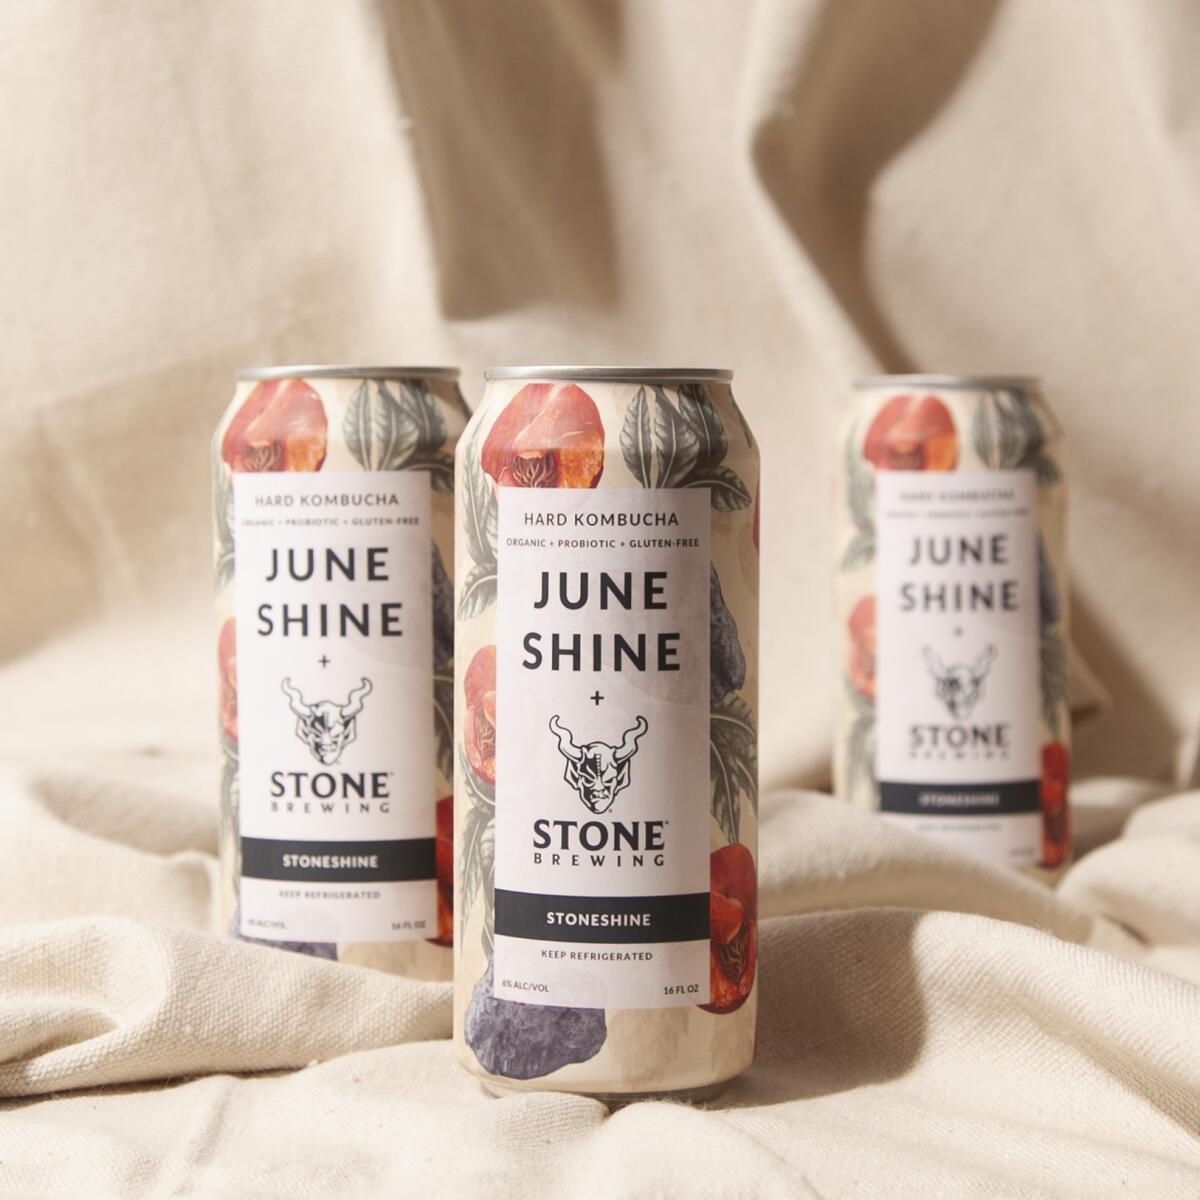 A can of StoneShine, a new product from JuneShine Hard Kombucha and Stone Brewing